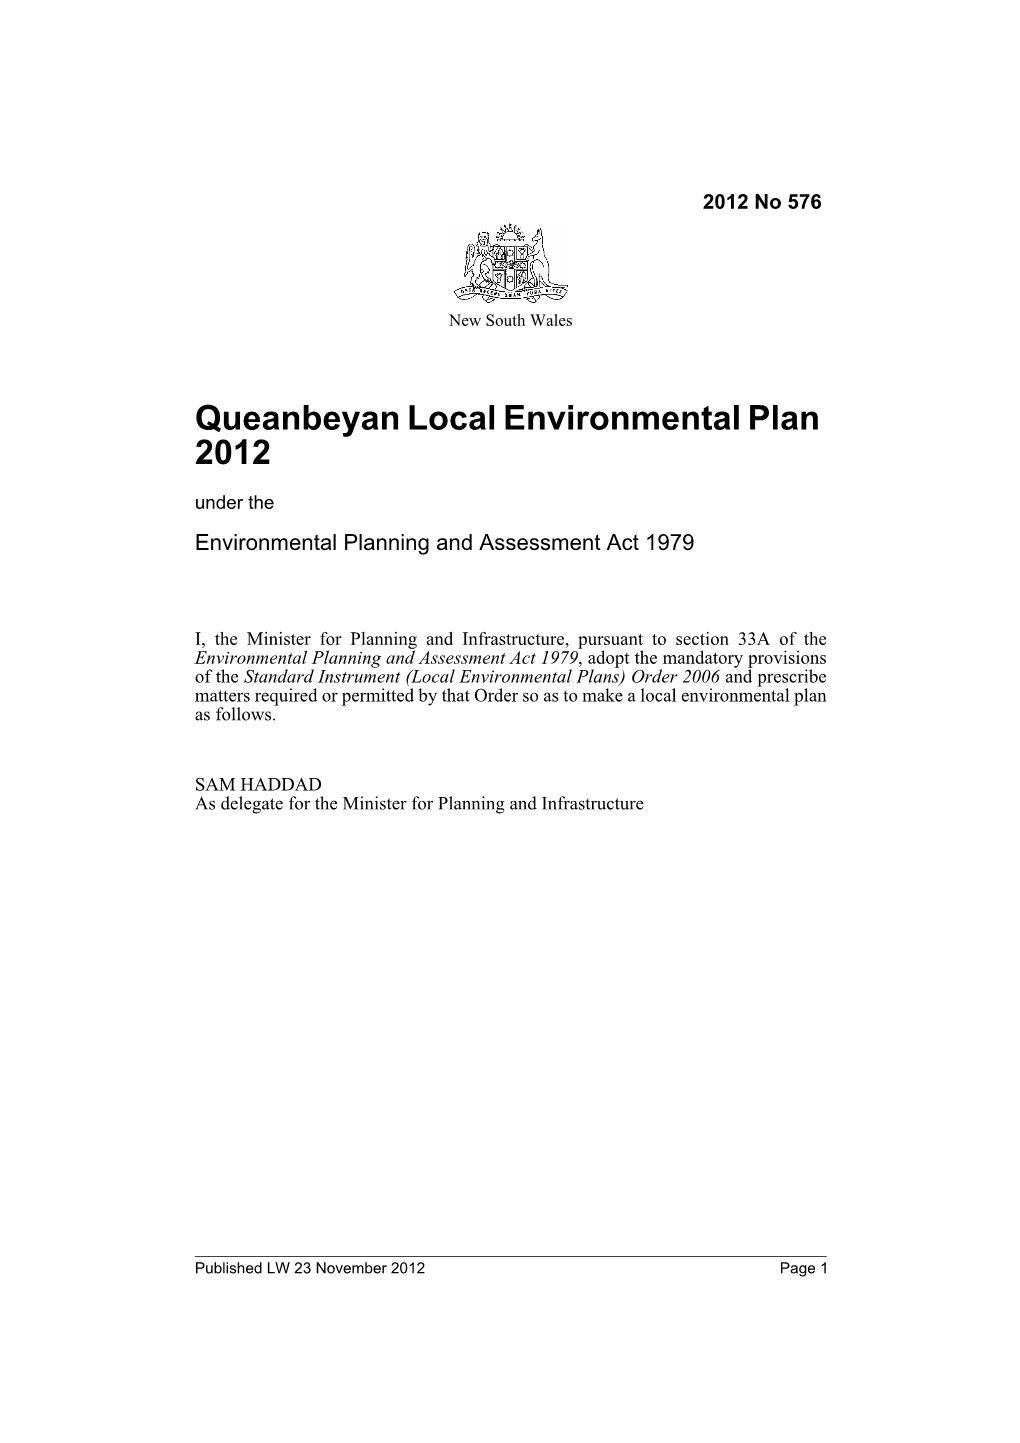 Queanbeyan Local Environmental Plan 2012 Under the Environmental Planning and Assessment Act 1979